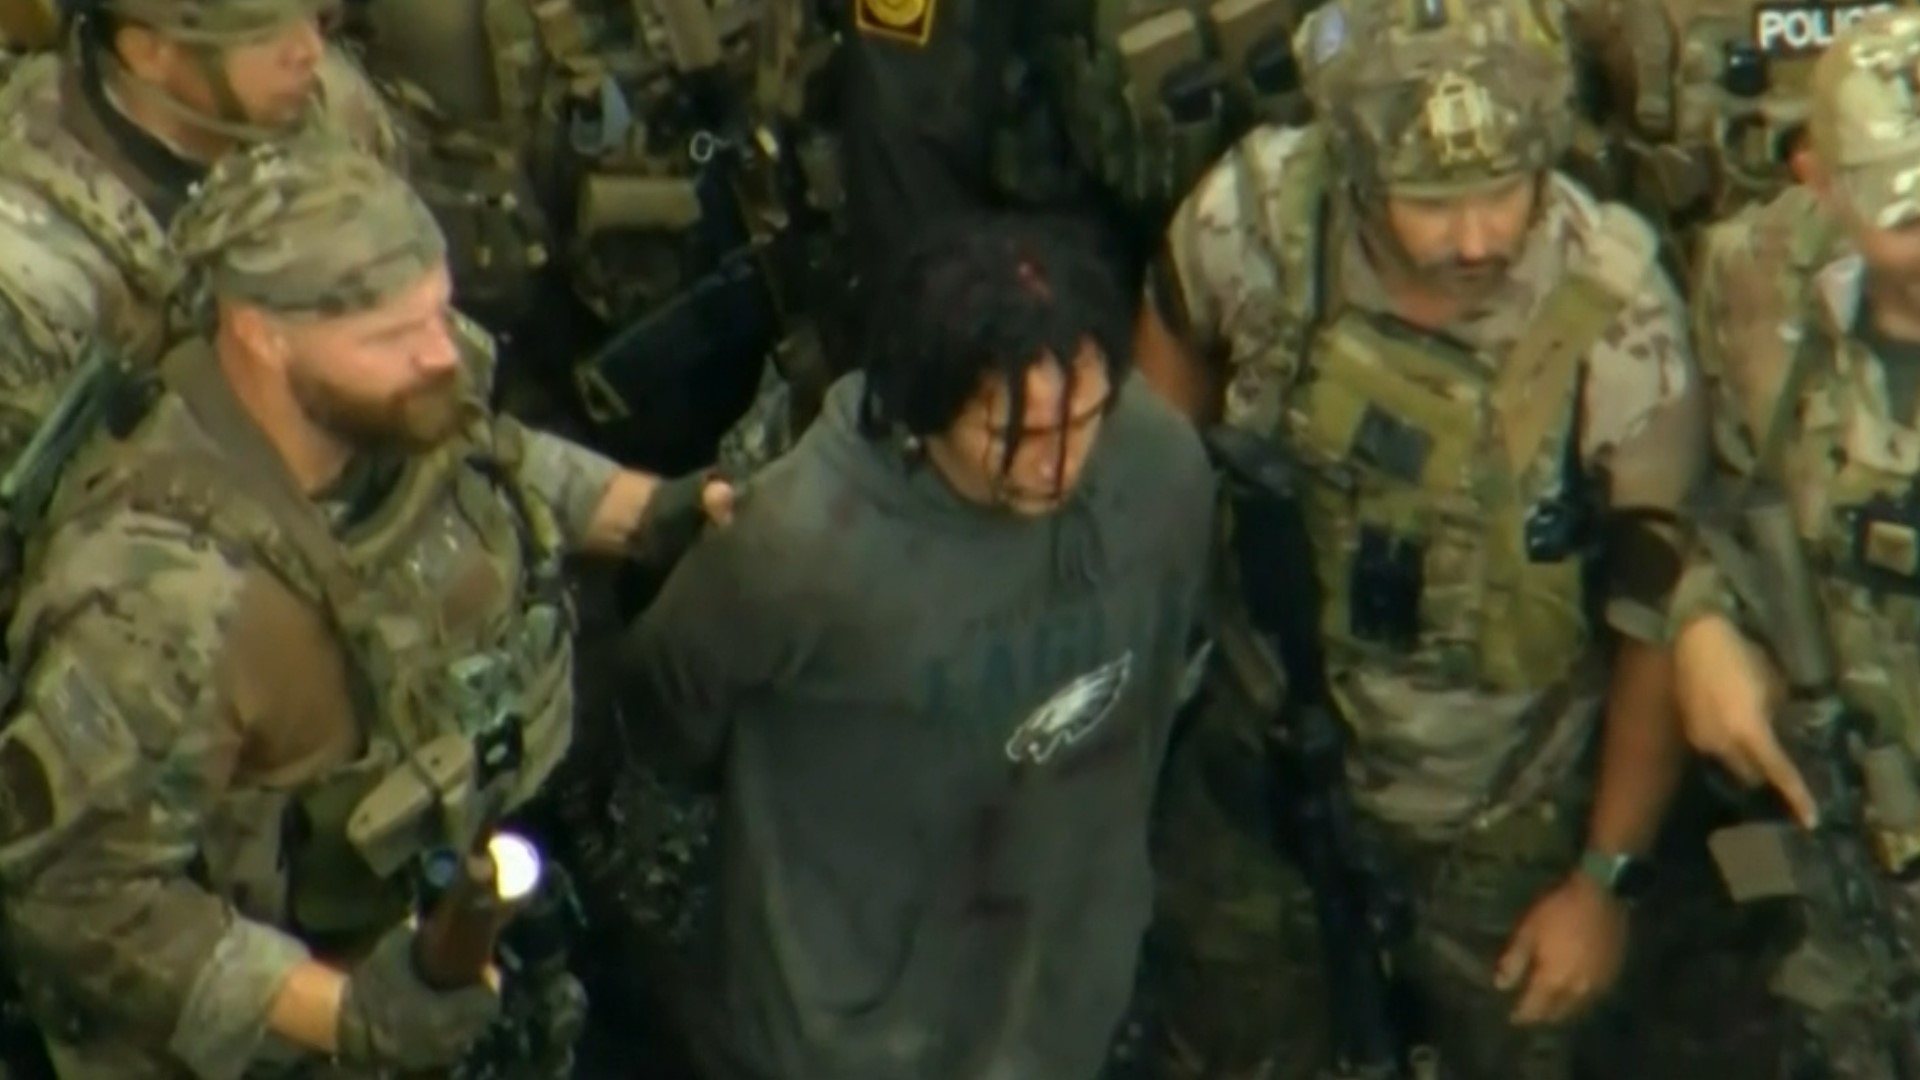 Pennsylvania State Police say escaped murderer Danelo Souza Cavalcante has been captured after nearly two weeks on the run.